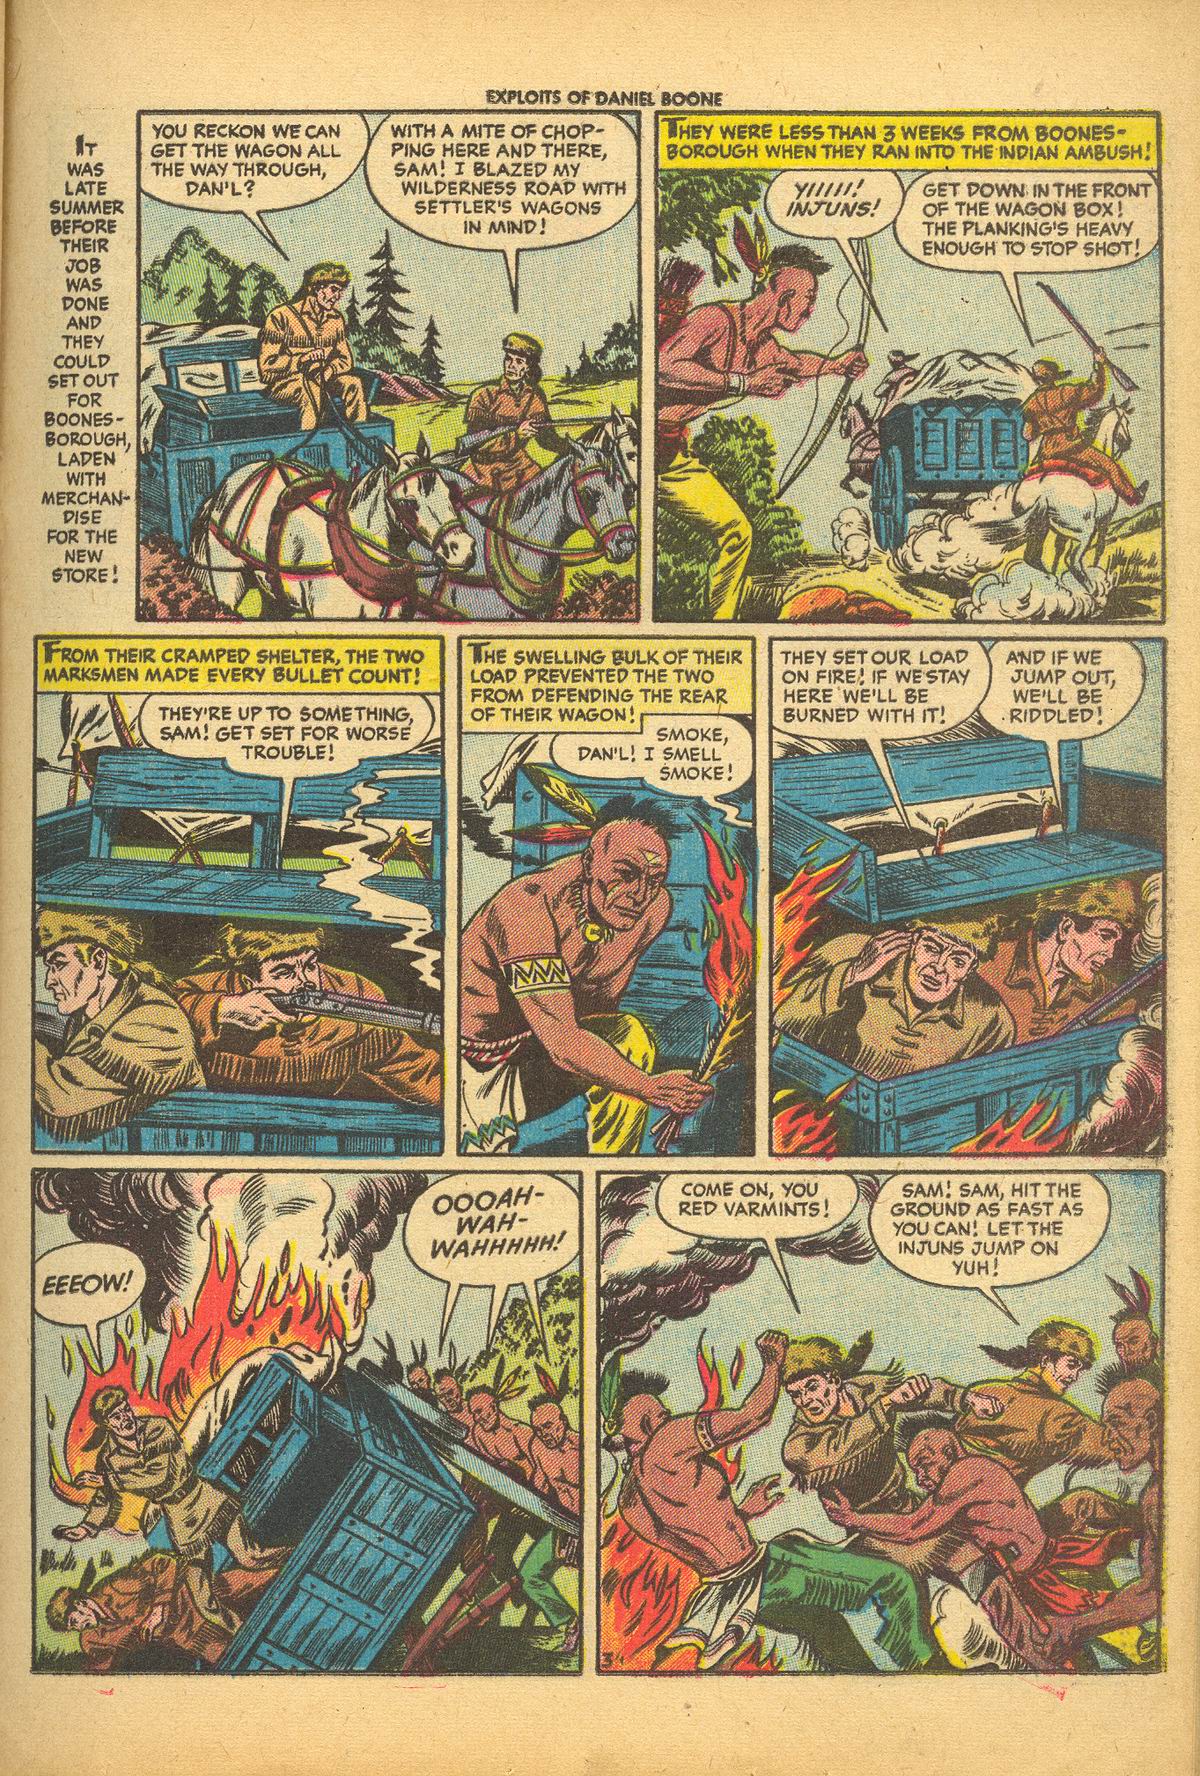 Read online Exploits of Daniel Boone comic -  Issue #3 - 21